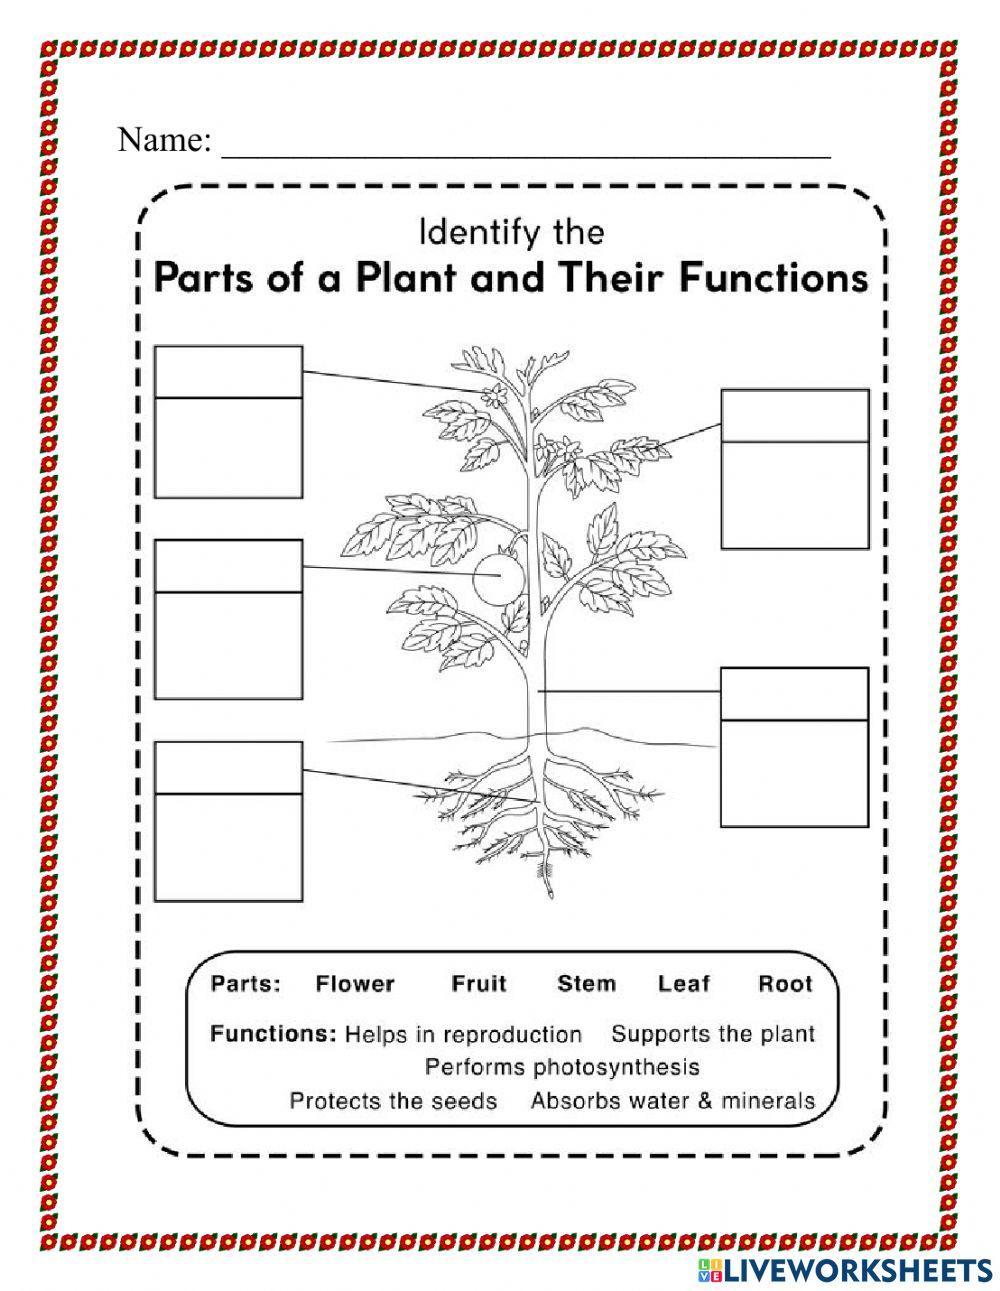 Functions of Parts of the Plant